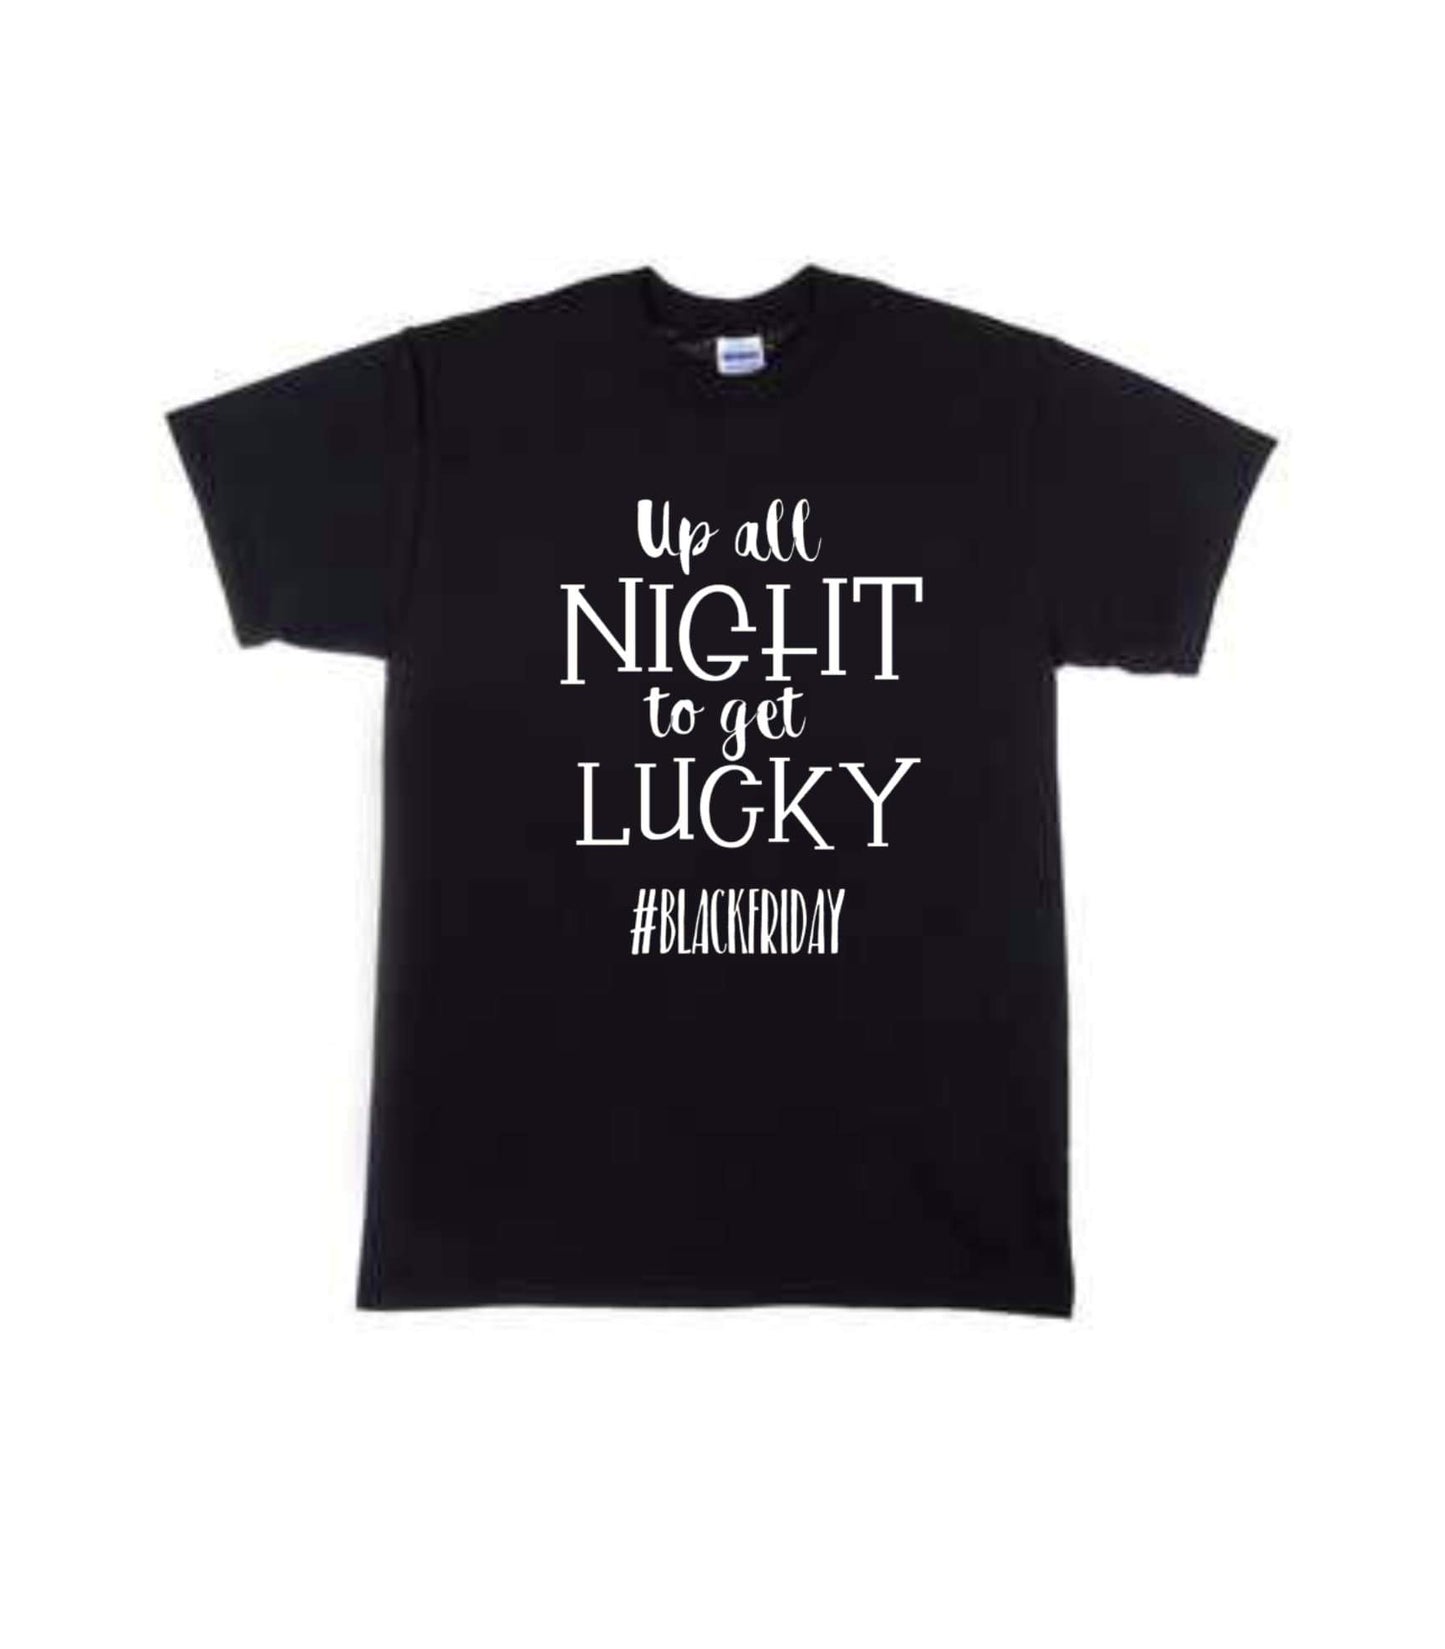 Up all night to get lucky- Black Friday Shirt